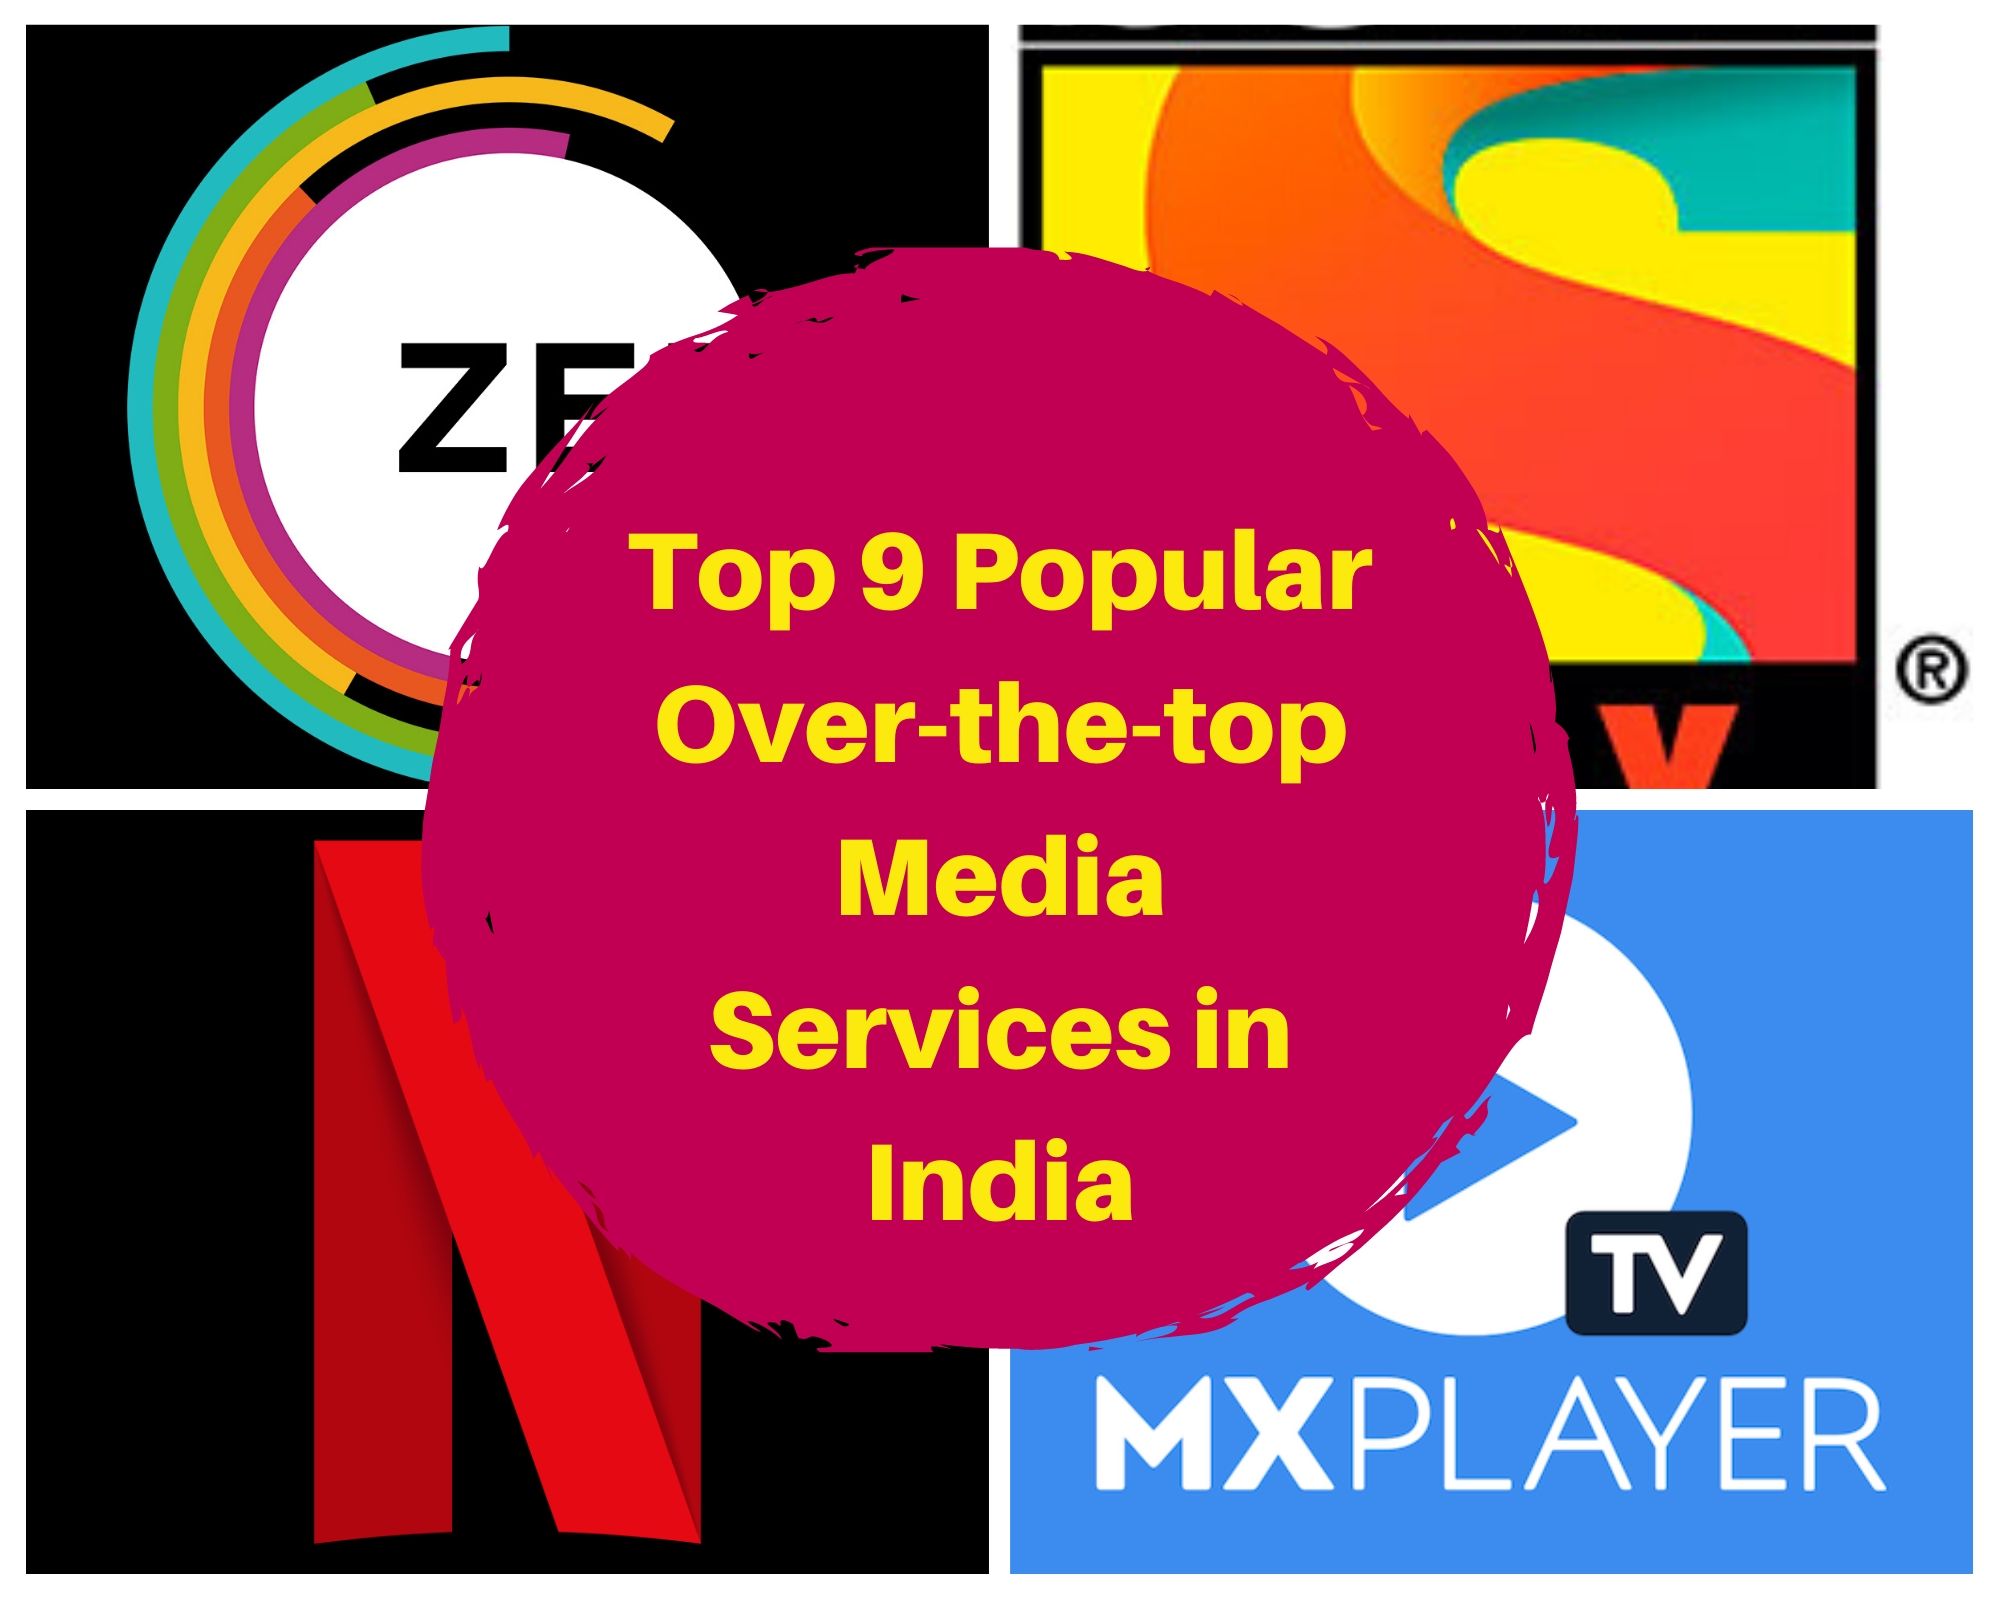 Top 9 popular Over-the-top media service in India